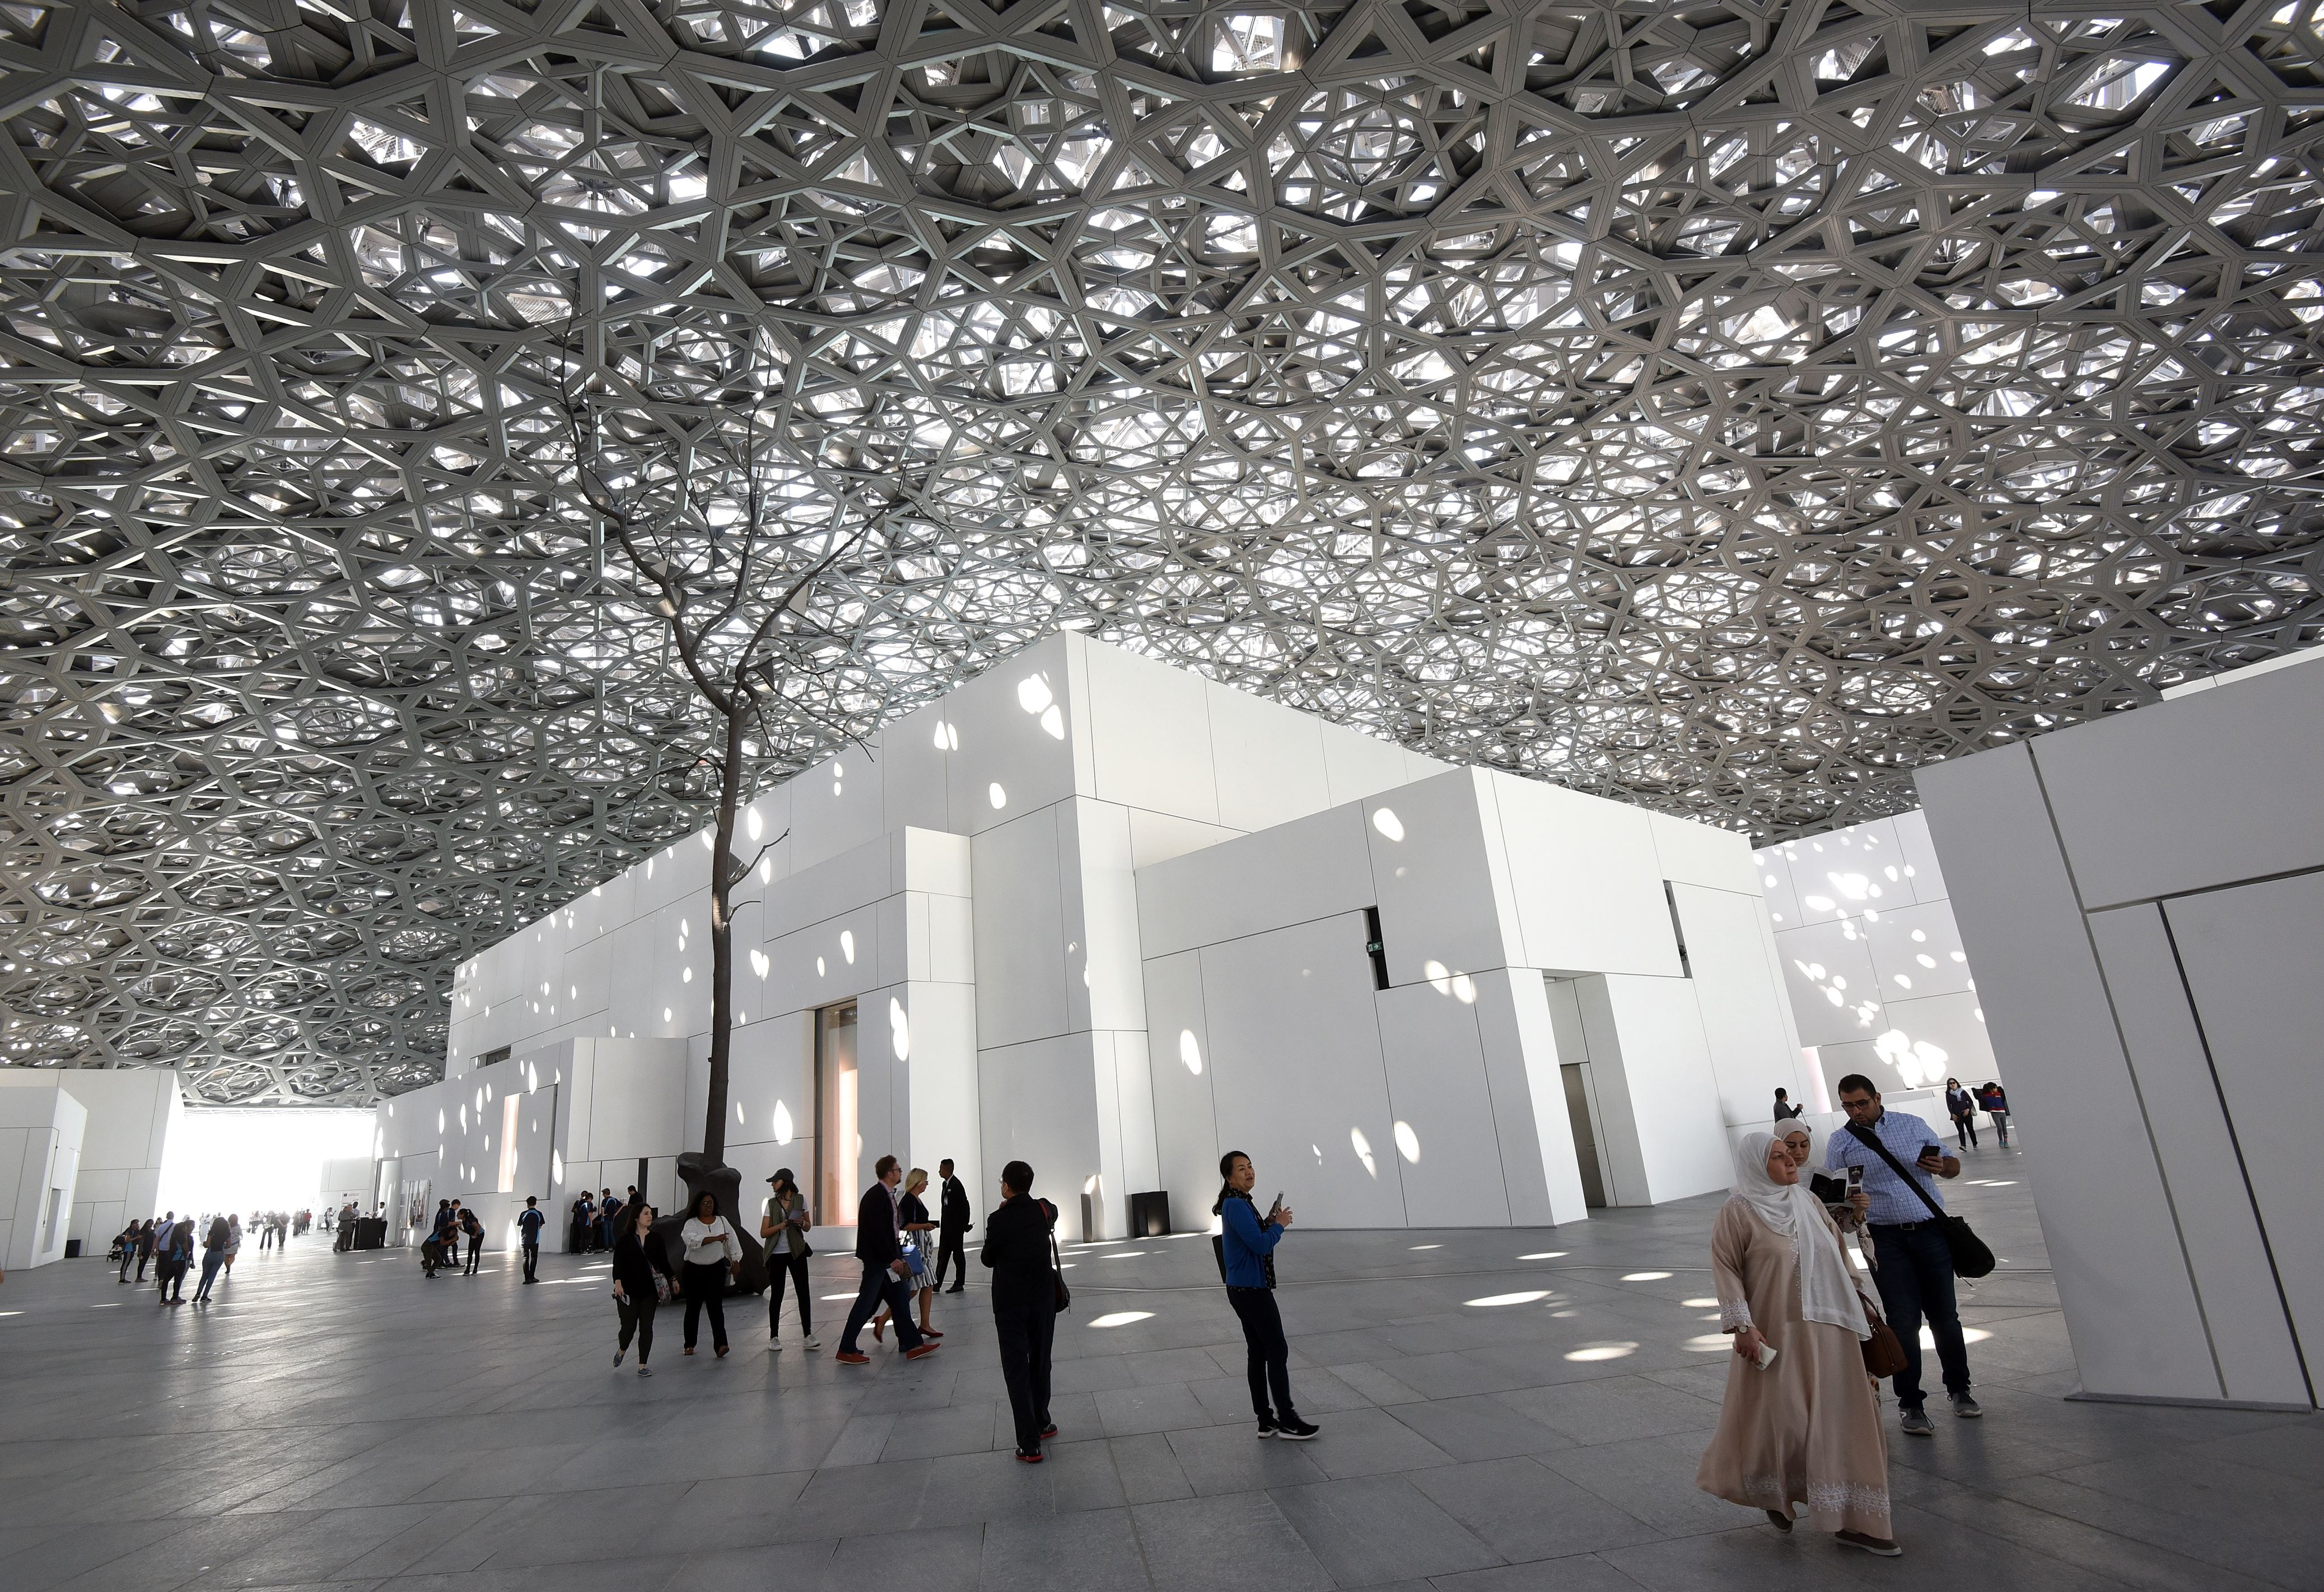 Slide 26 of 77: ABU DHABI, UNITED ARAB EMIRATES - JANUARY 09:  A general view of the Louvre Abu Dhabi museum on January 9, 2018 in Abu Dhabi, United Arab Emirates.  (Photo by Tom Dulat/Getty Images)